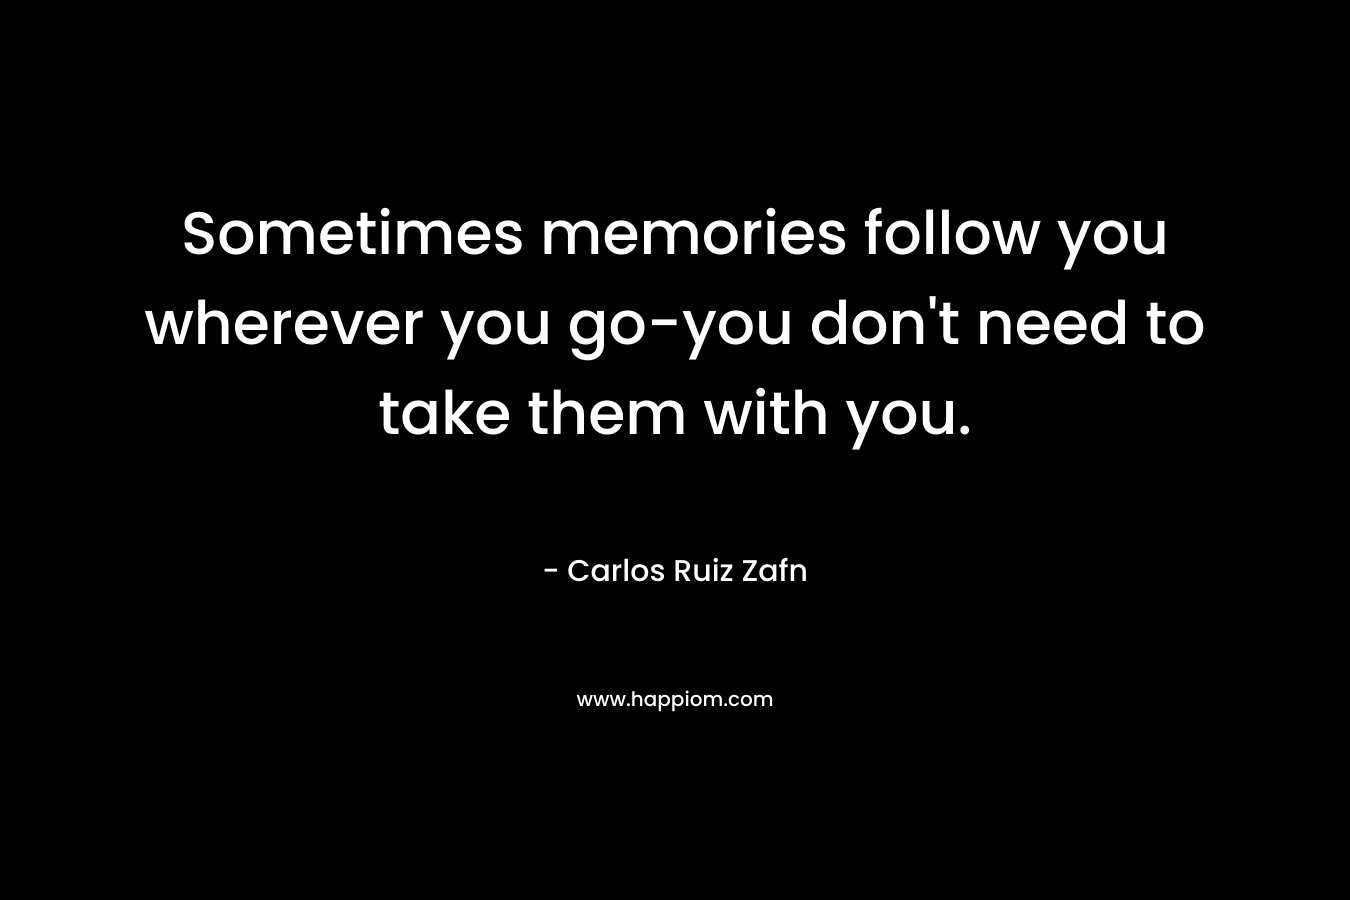 Sometimes memories follow you wherever you go-you don't need to take them with you.